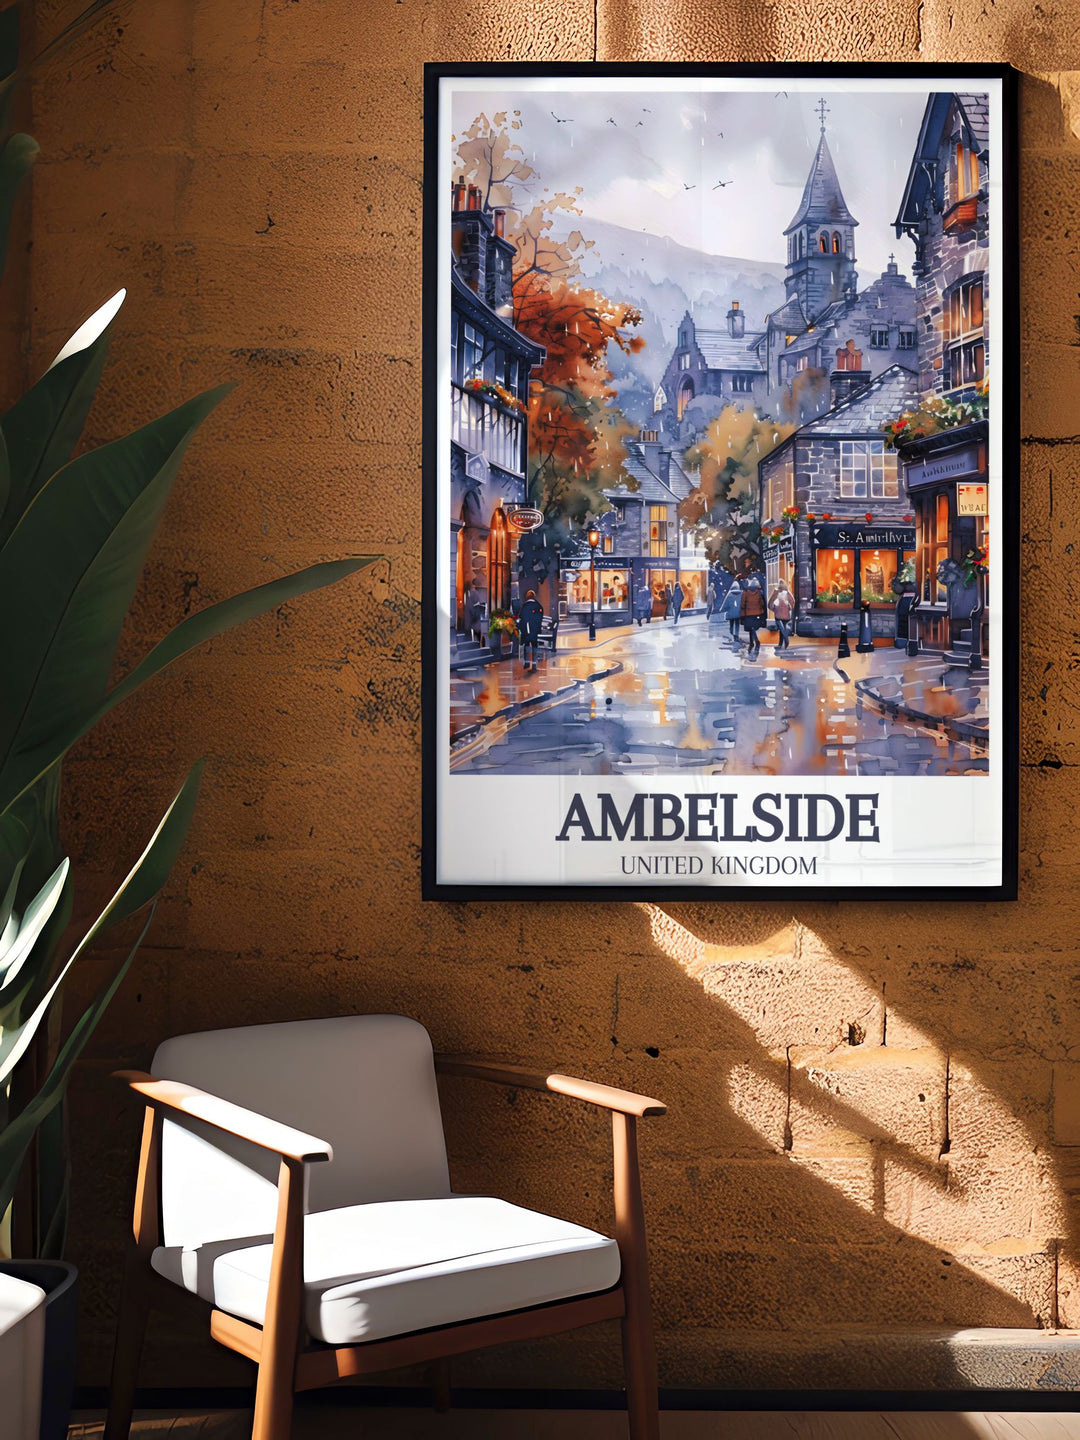 High quality print of the Armitt Museum in Ambleside, England, capturing the cultural treasures and intellectual charm of this iconic area.